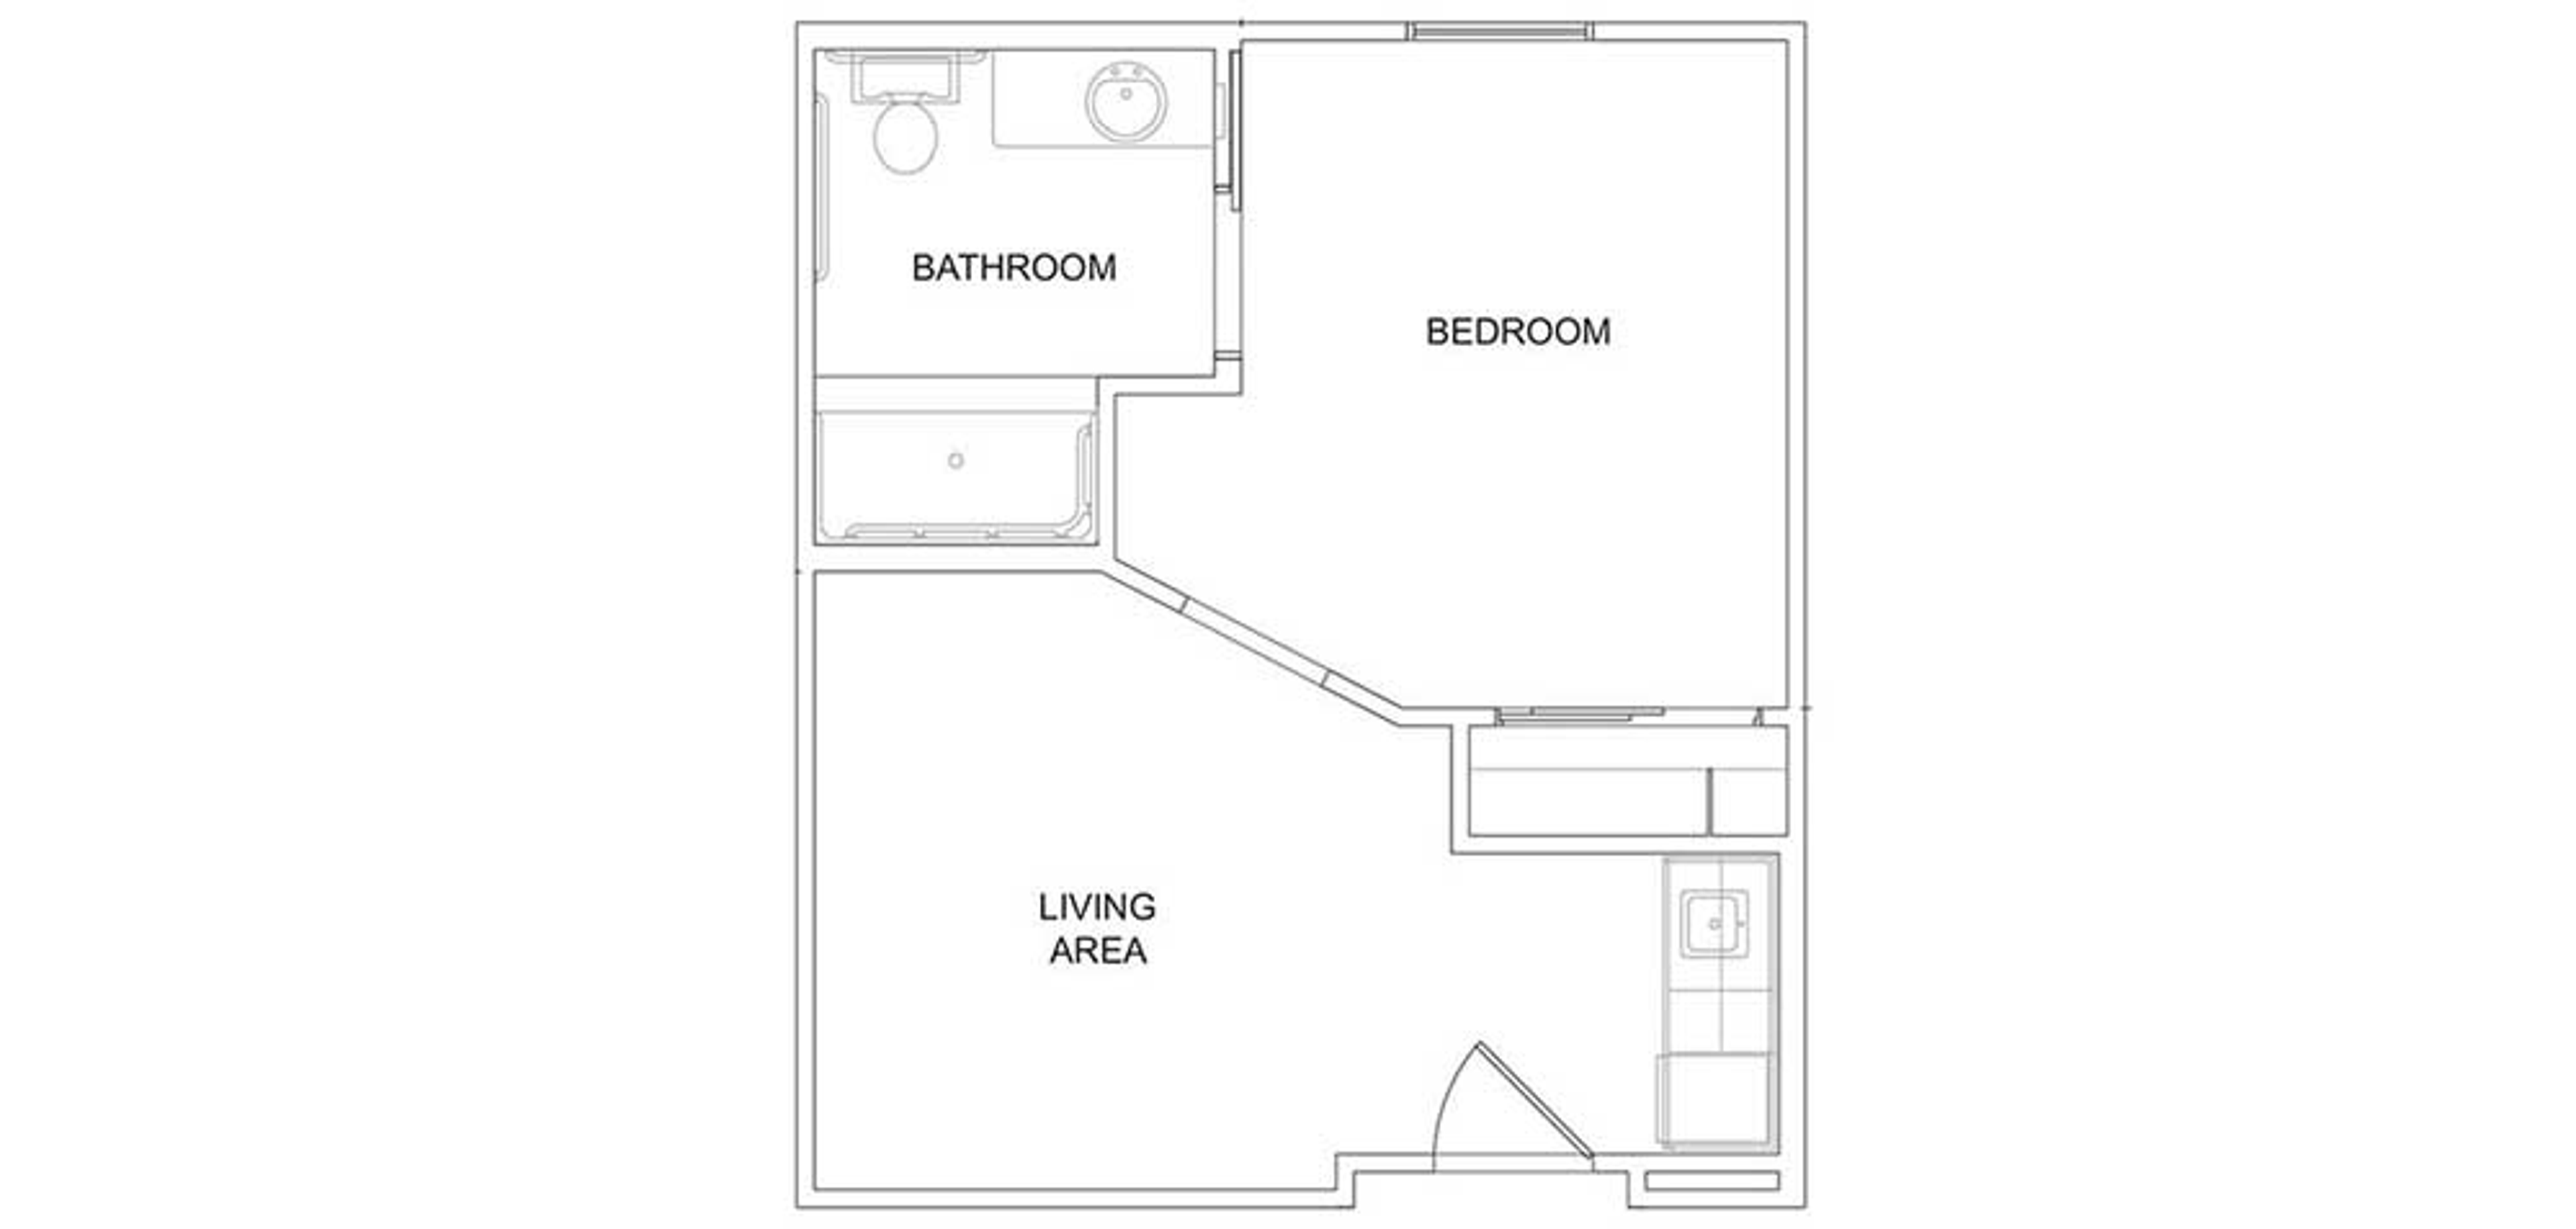 Floorplan - Stonefield - 1 bed, 1 bath, Deluxe Assisted Living